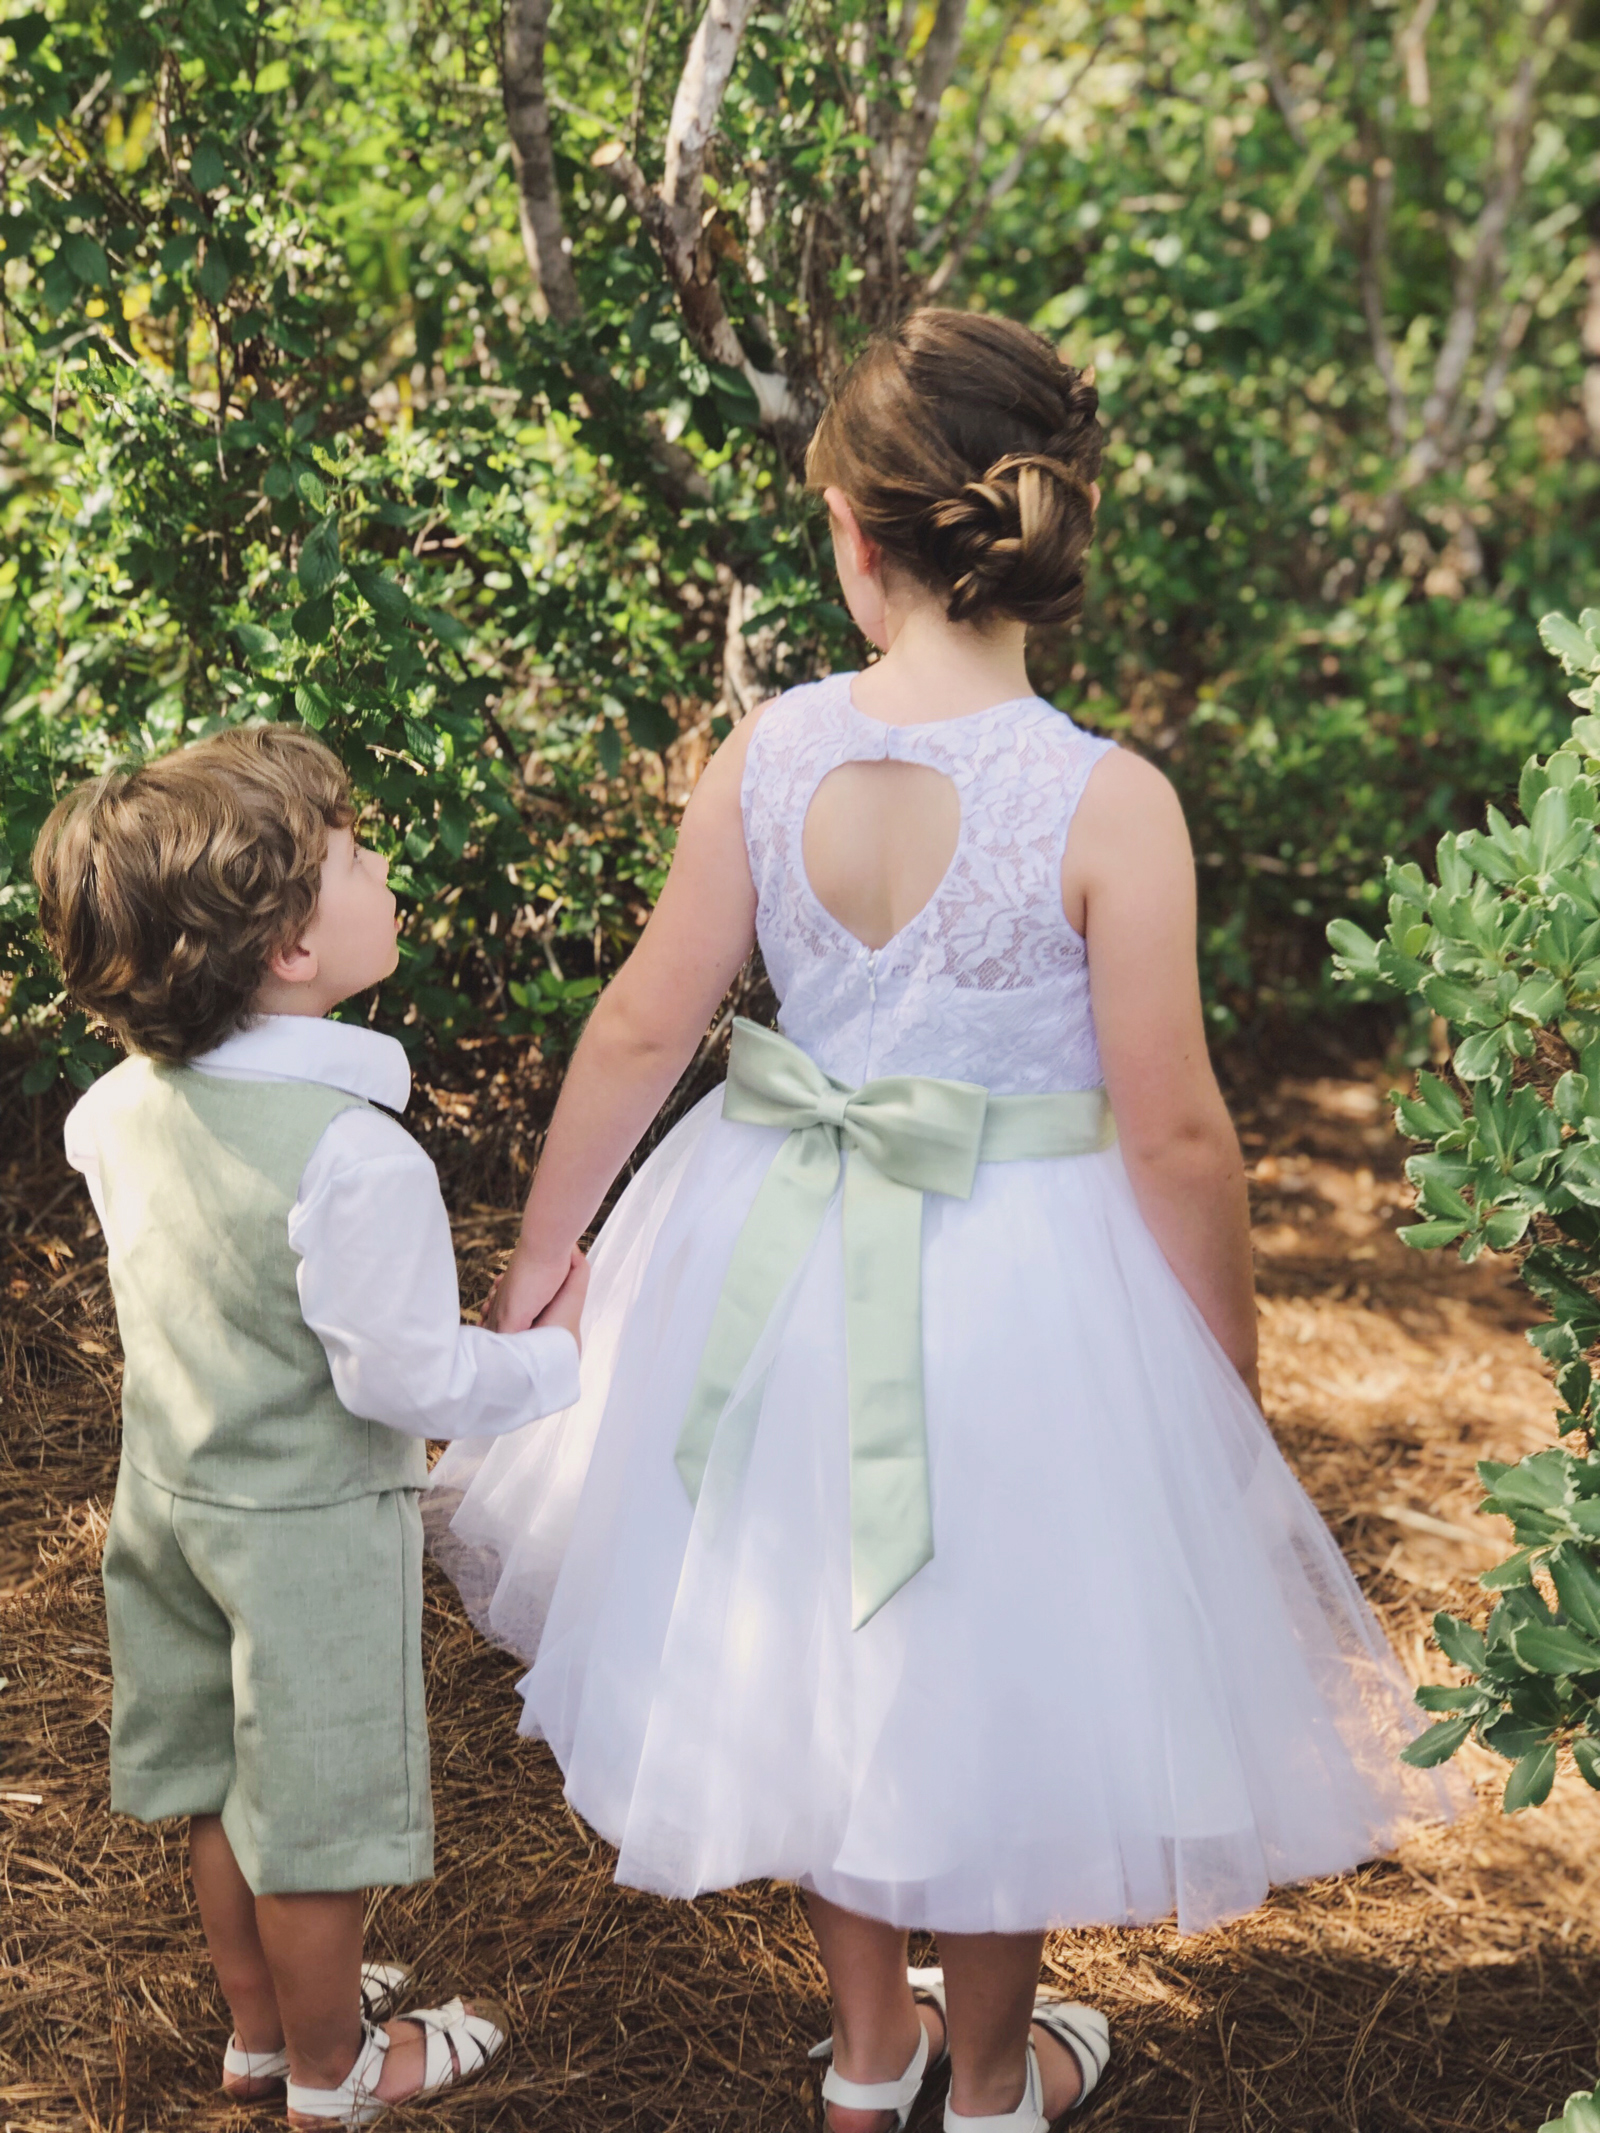 professional flower girl, ring bearer, and squishy baby for hire!